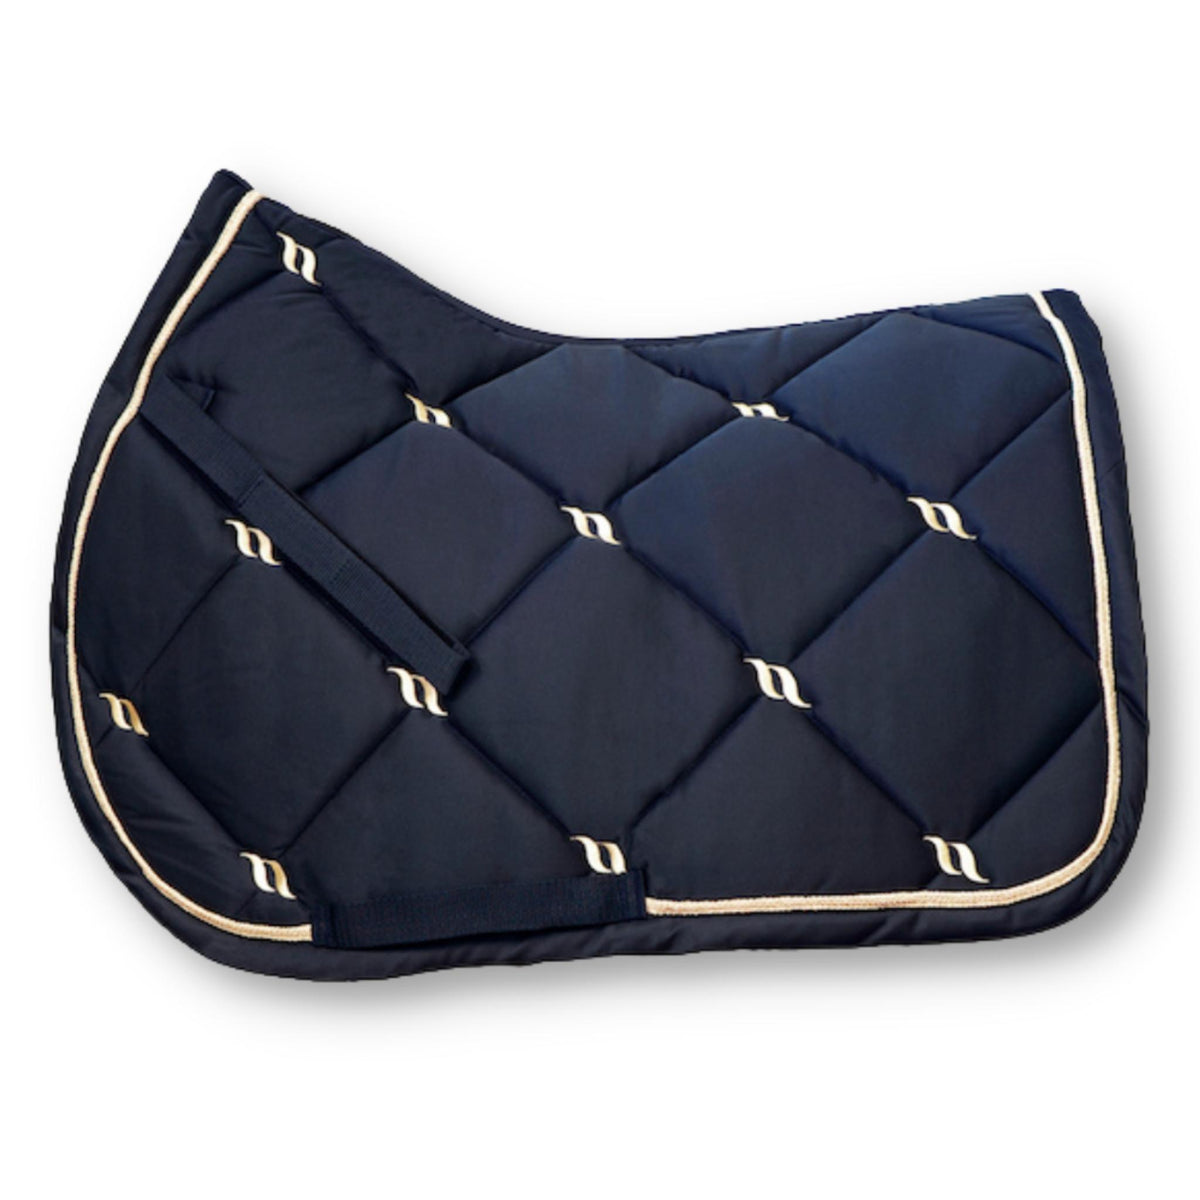 Navy saddle pad with satin finish and subtle gold details including trim.